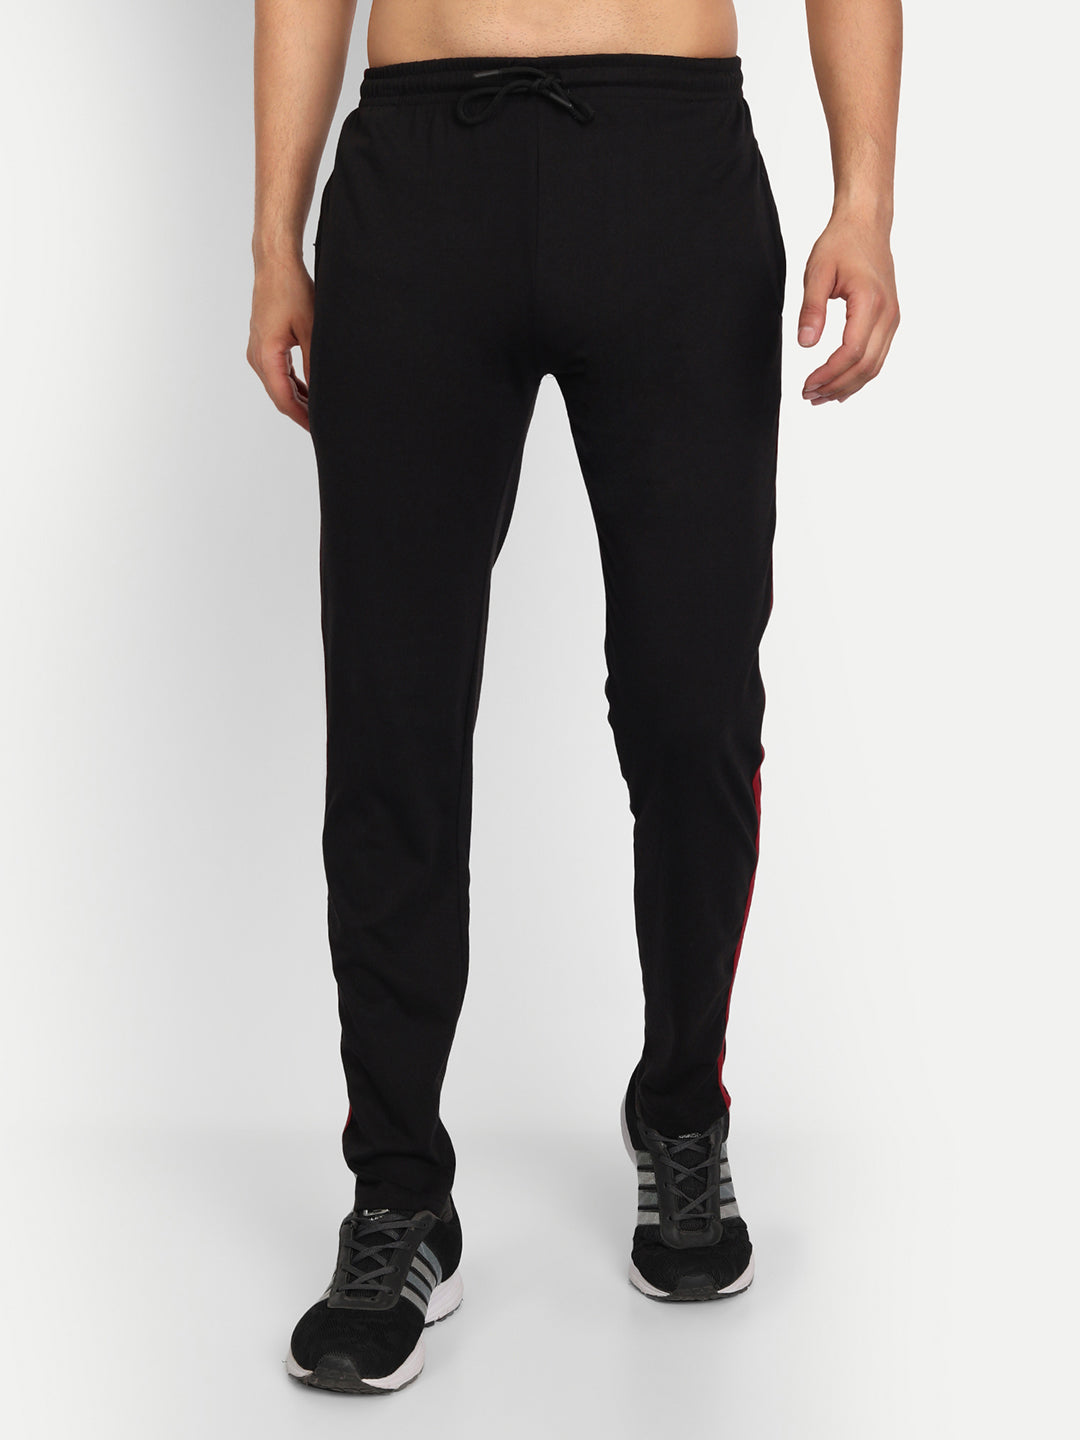 Buy ABCUSTOMS Men's Regular Fit Cotton Pant (AED-01-65616247_Black_30) at  Amazon.in